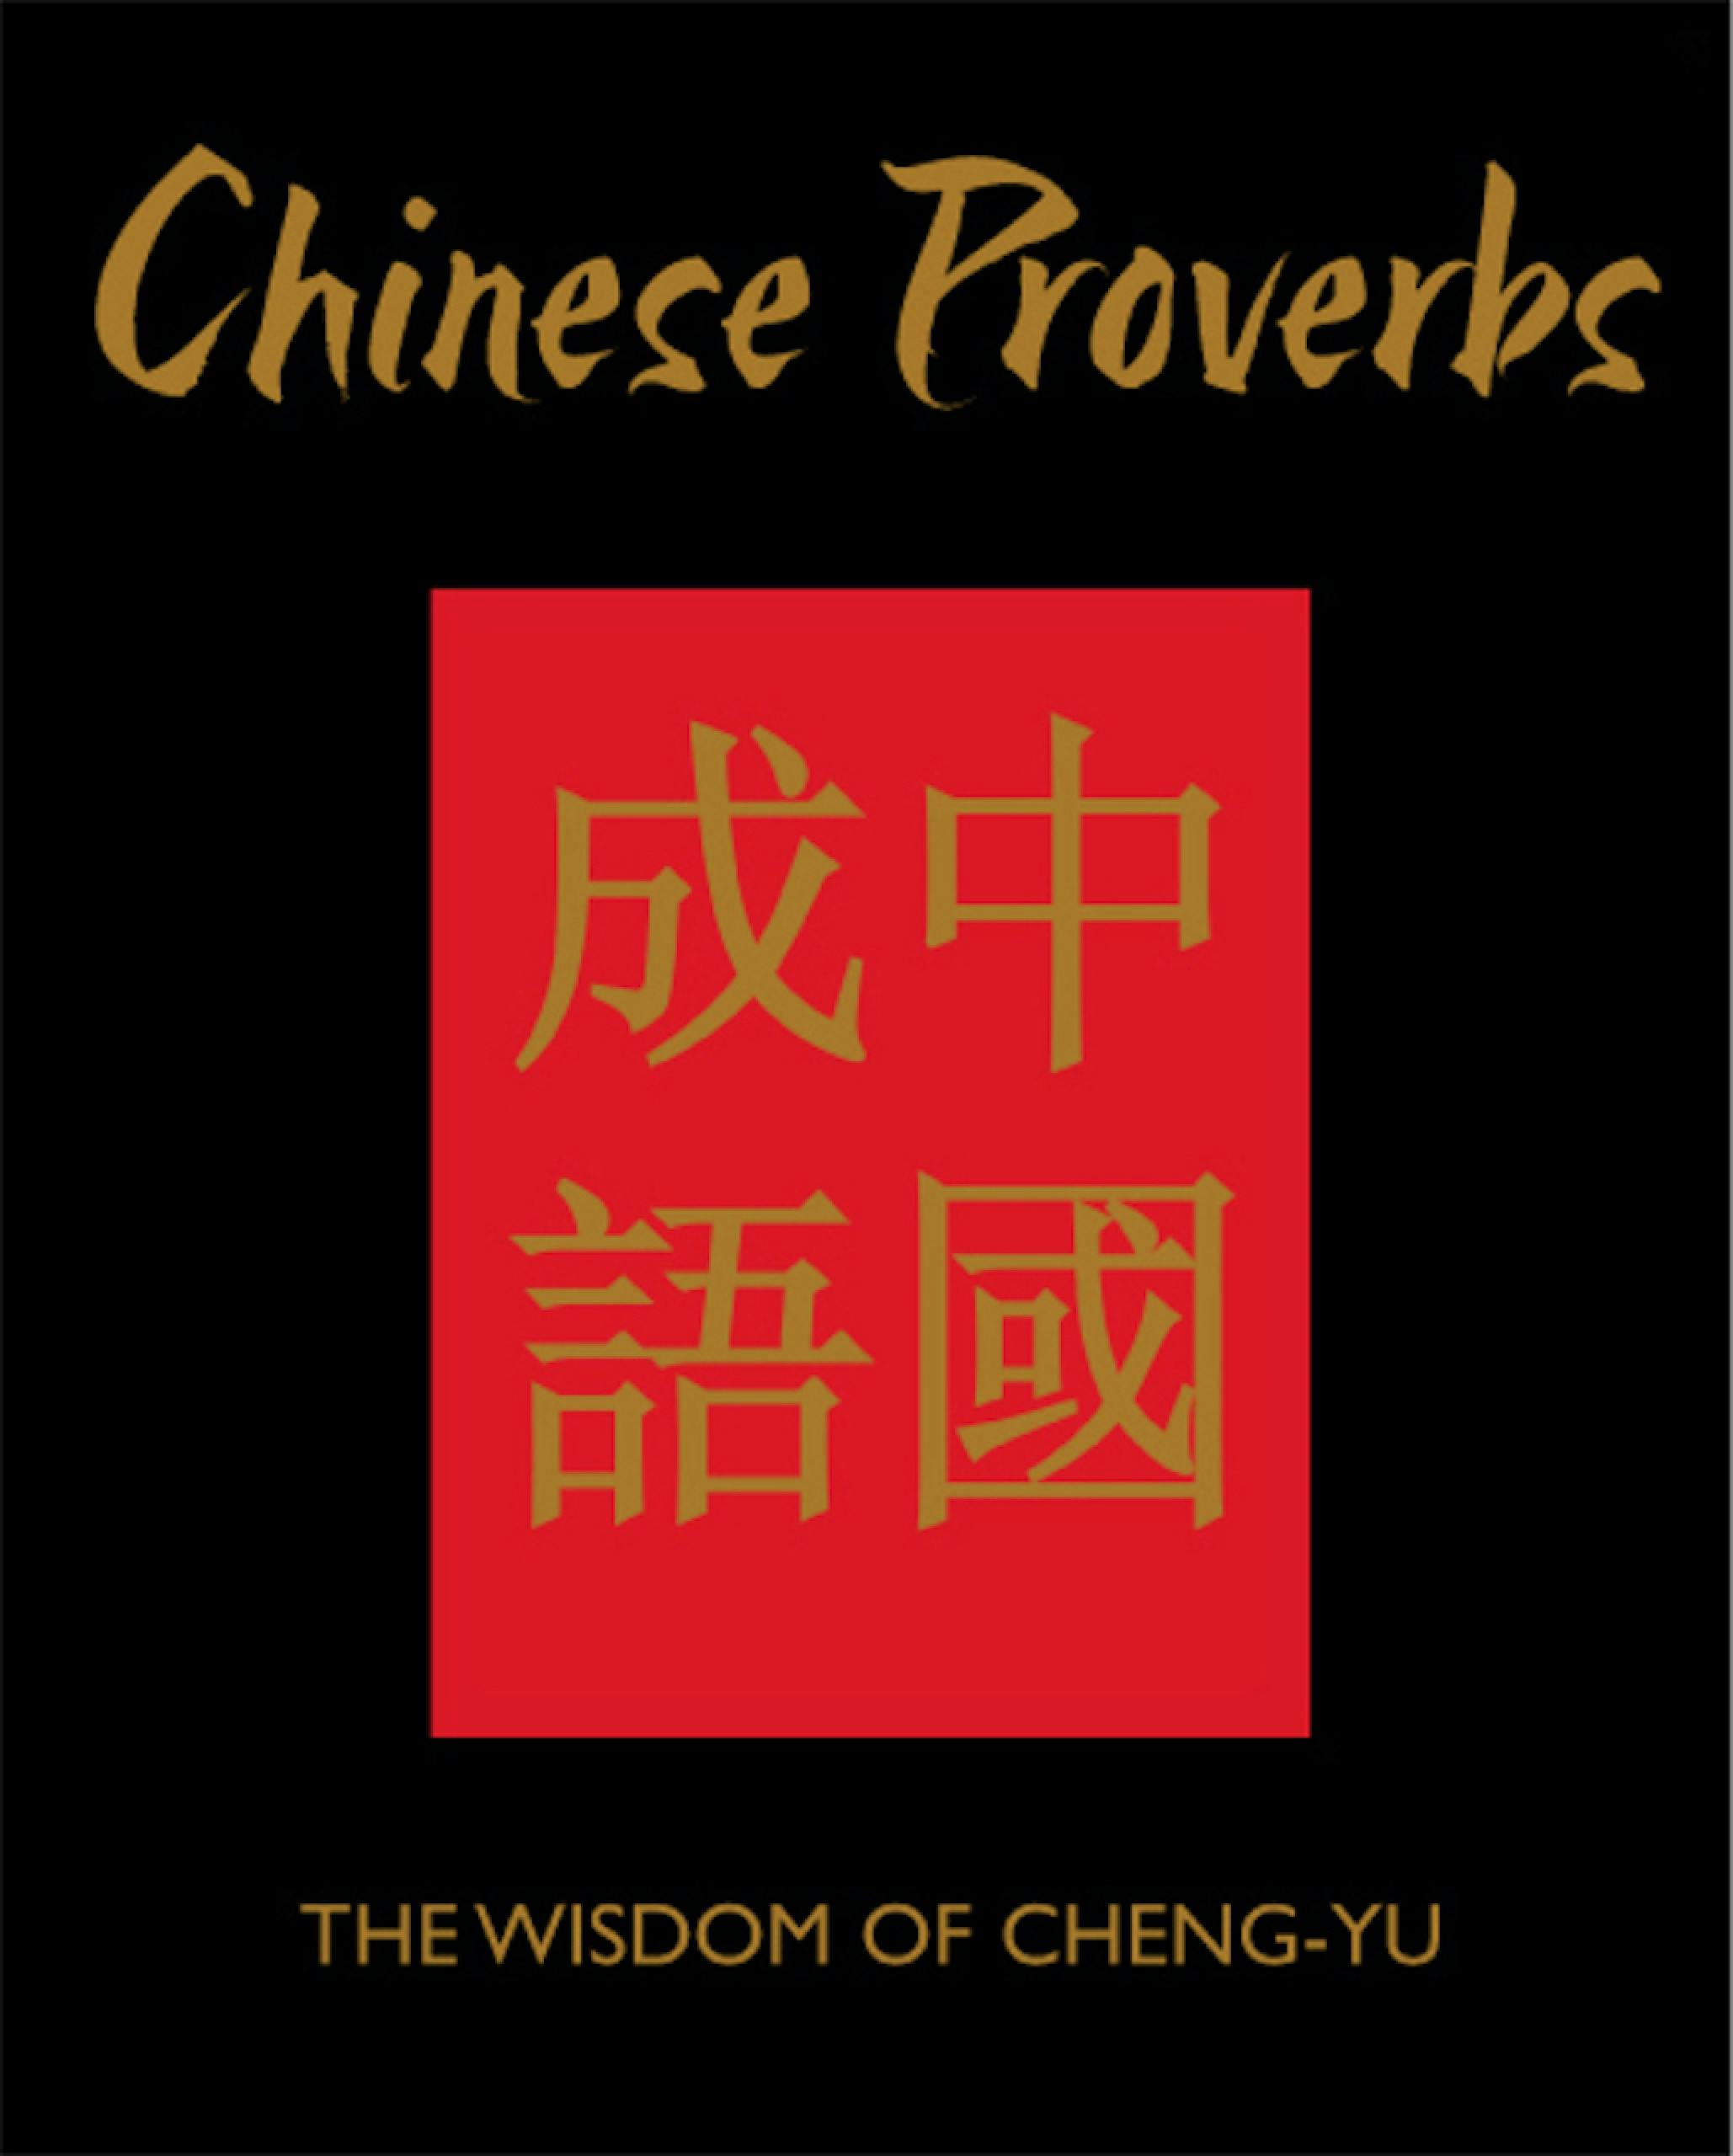 Chinese Proverbs - undefined